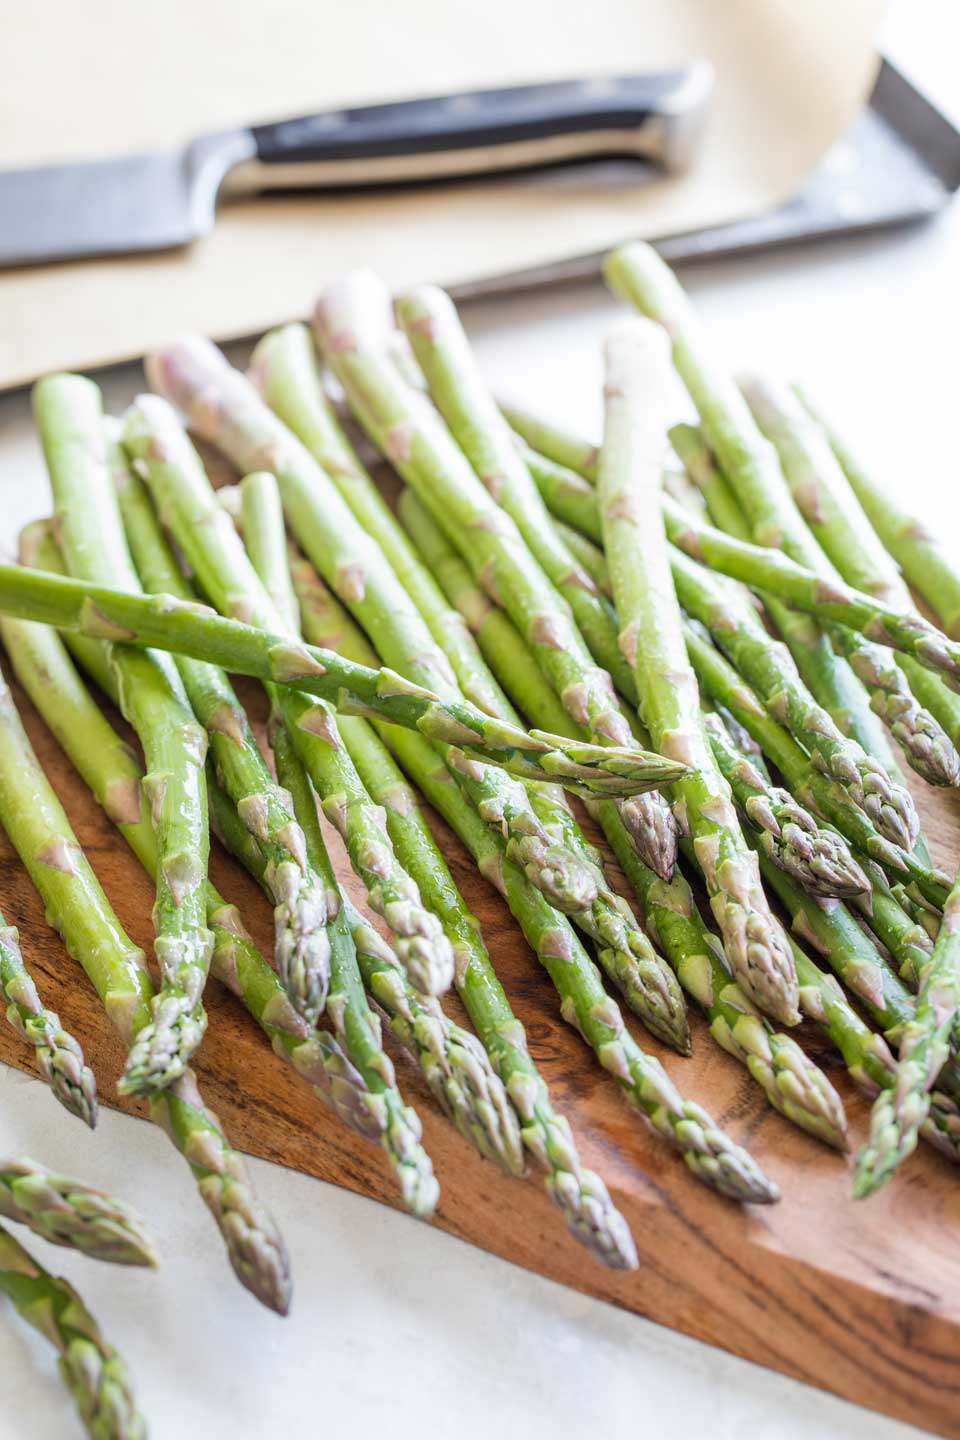 Pencil-width asparagus spears that are fresh and damp with water droplets, spilled across a cutting board.